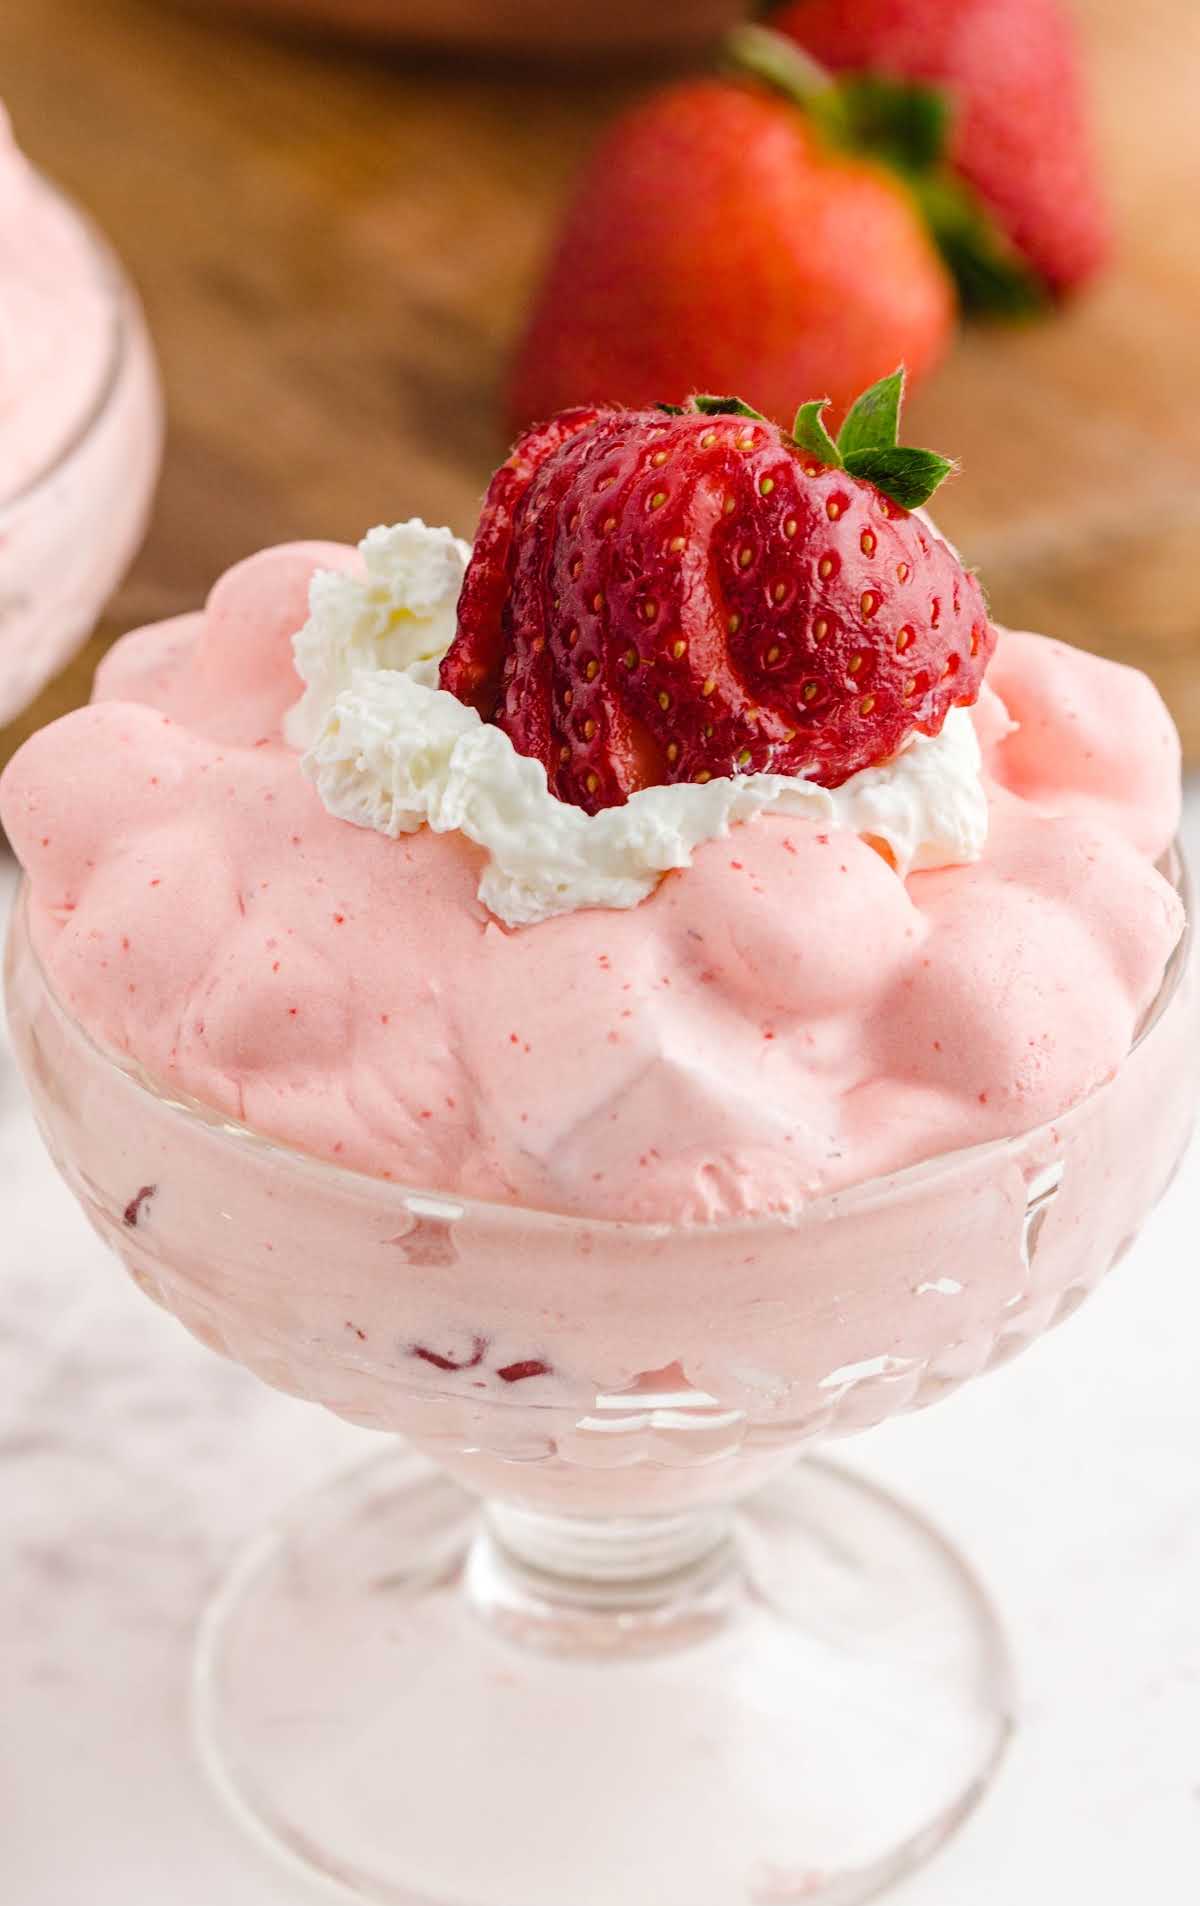 A dessert on a plate, with Strawberry Fluff